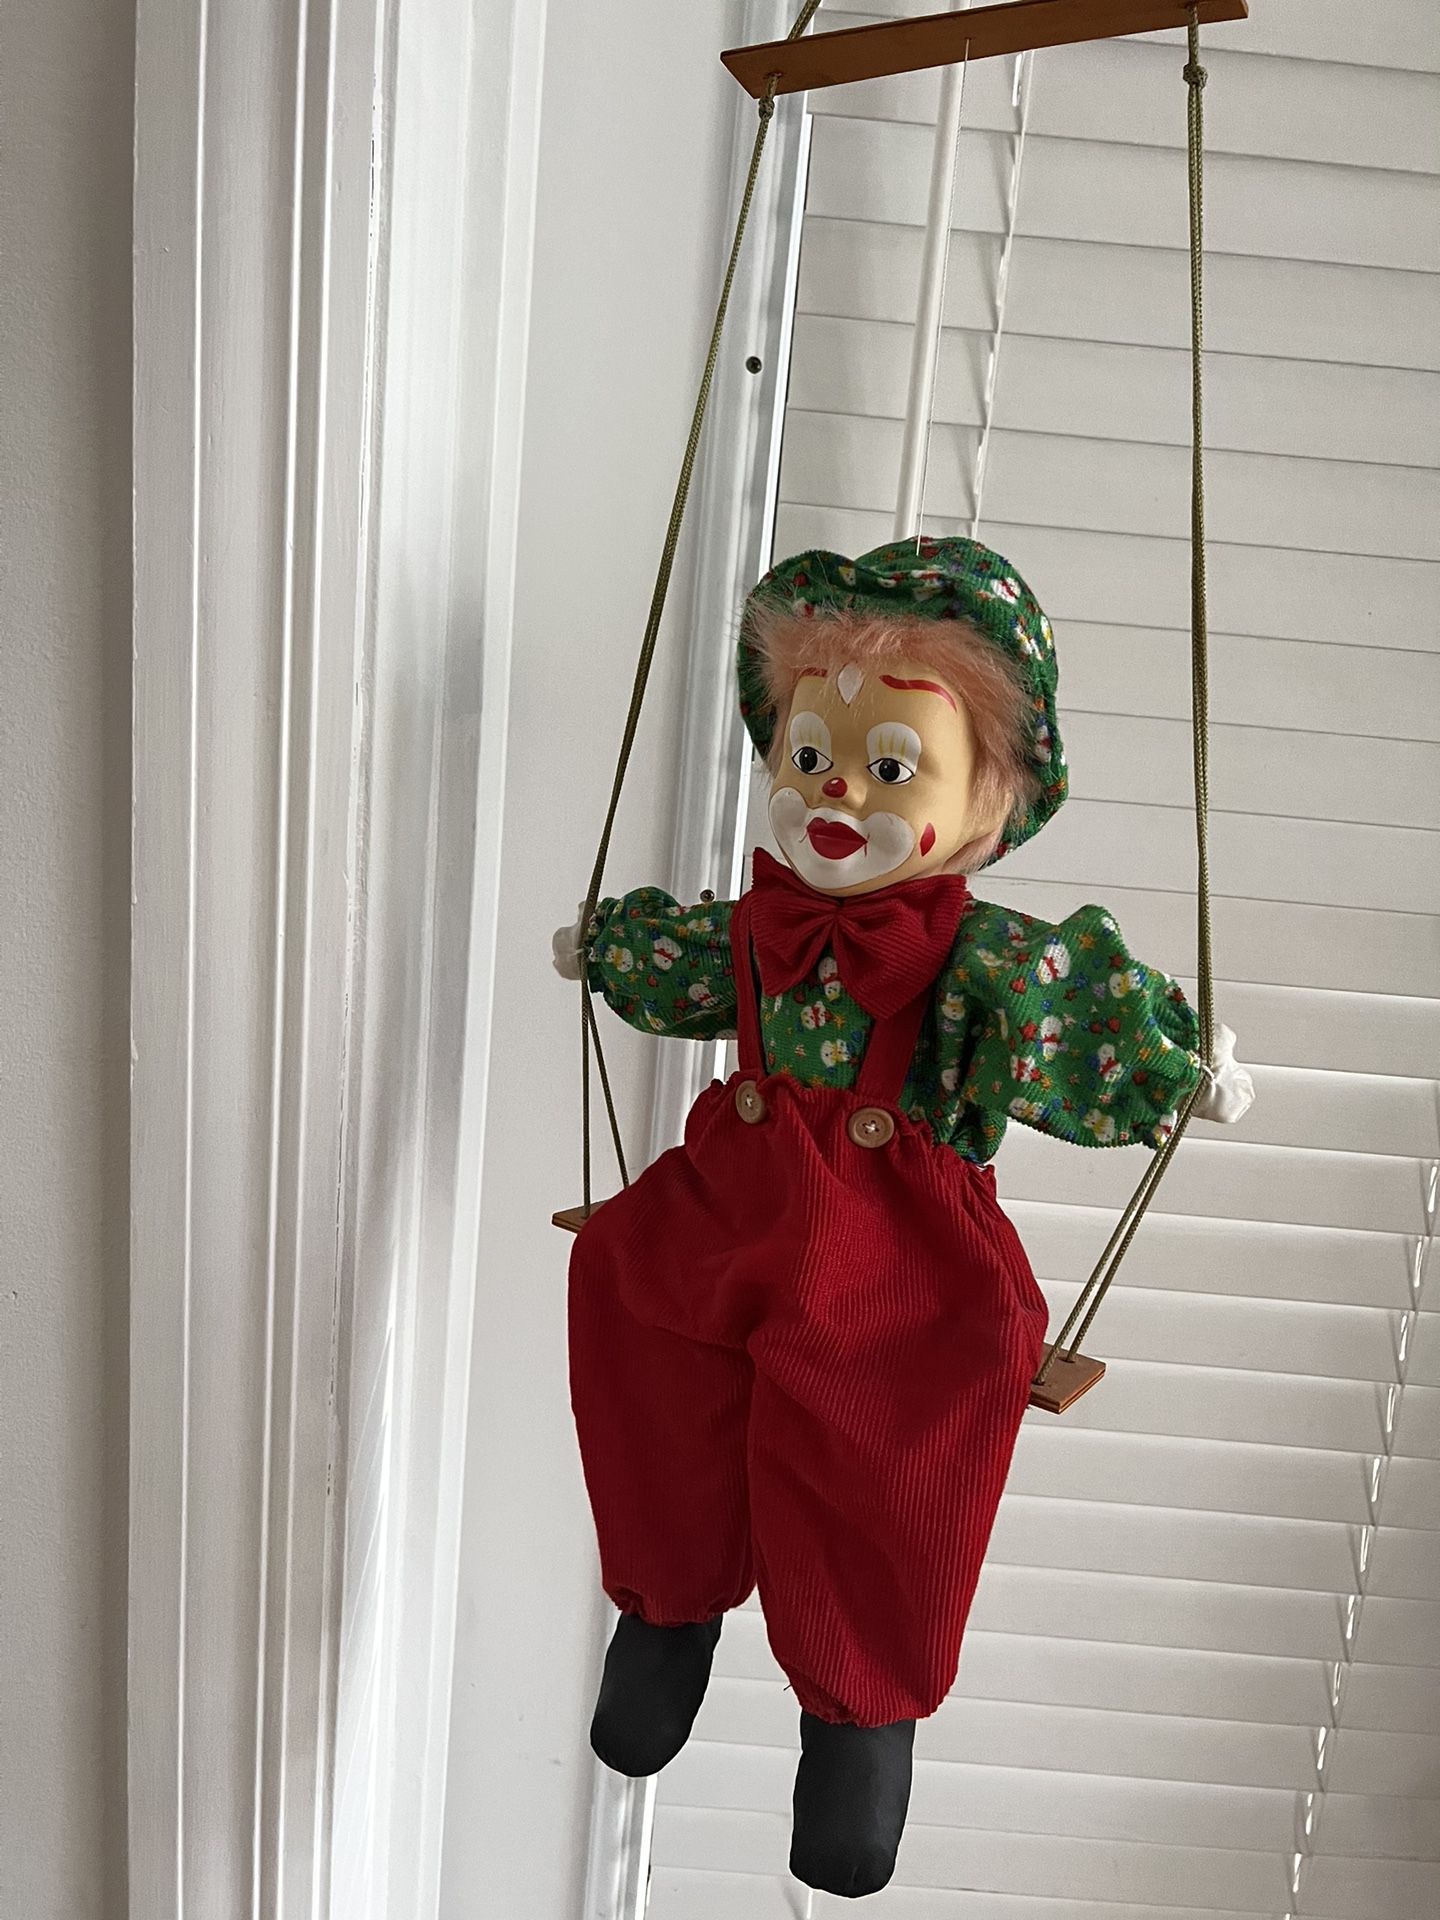 large vintage clown on swing soft bodied clown with porcelain face red hair collectible  In great condition  Approx 31 inches tall  Body of the clown 